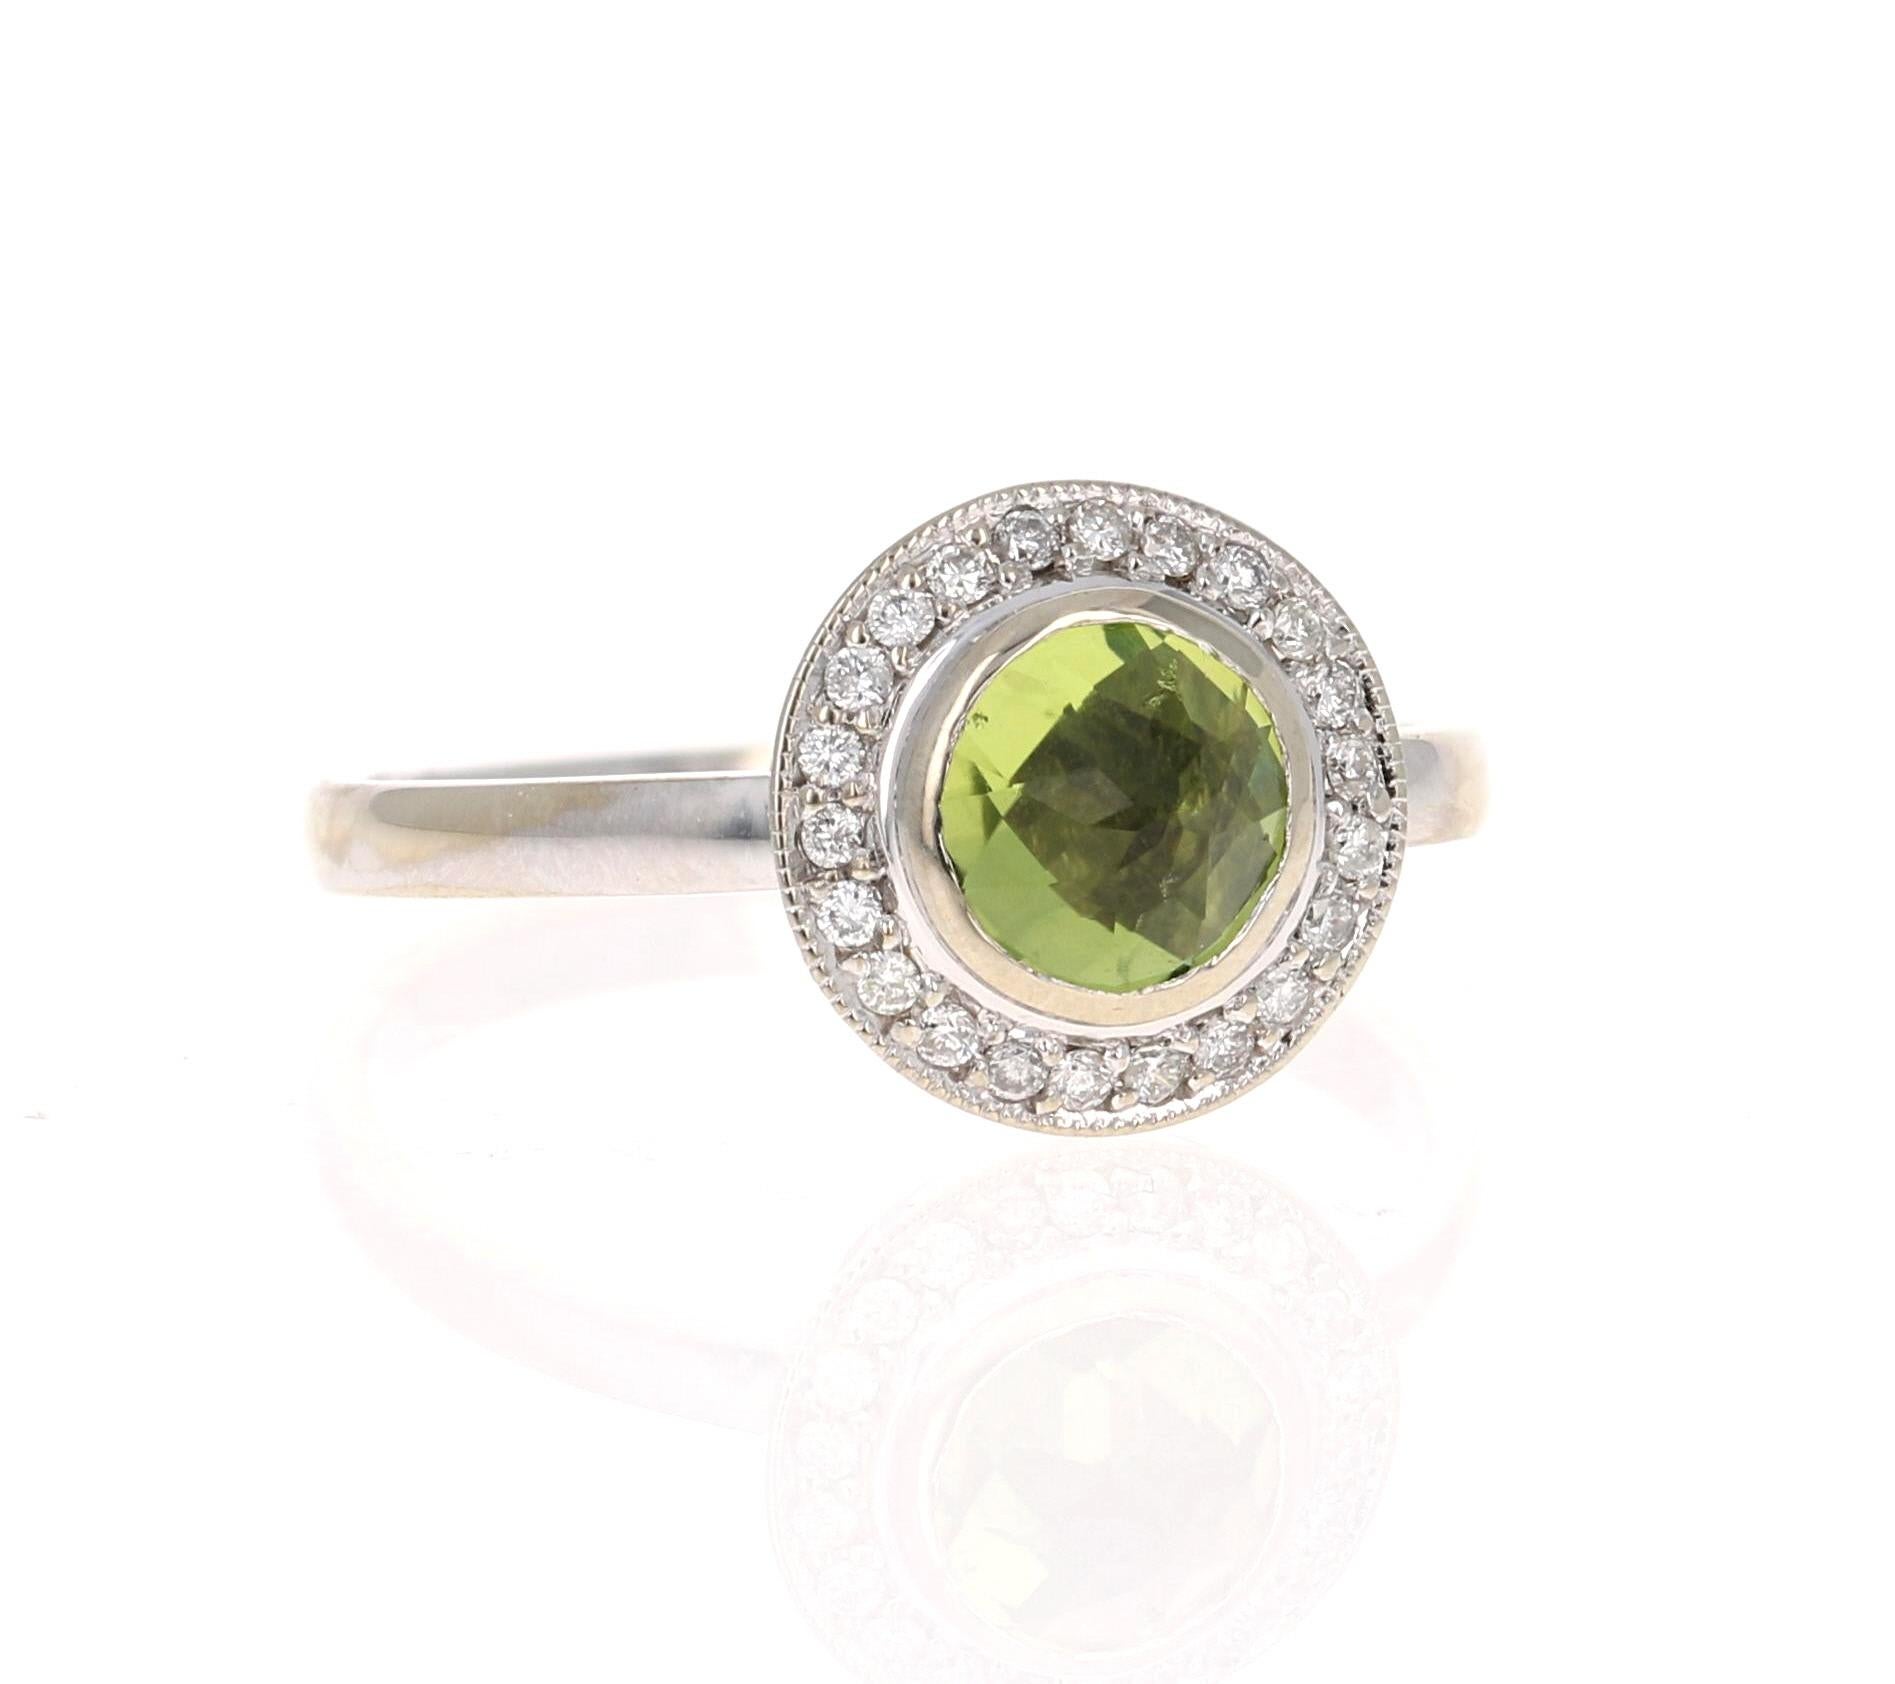 A cute and dainty Peridot ring accented with some Diamonds!

This cute ring has a Round Cut Peridot that weighs 0.89 Carats and is surrounded by a beautiful halo of 22 Round Cut Diamonds that weigh 0.14 Carats. (Clarity: SI, Color: F) The total